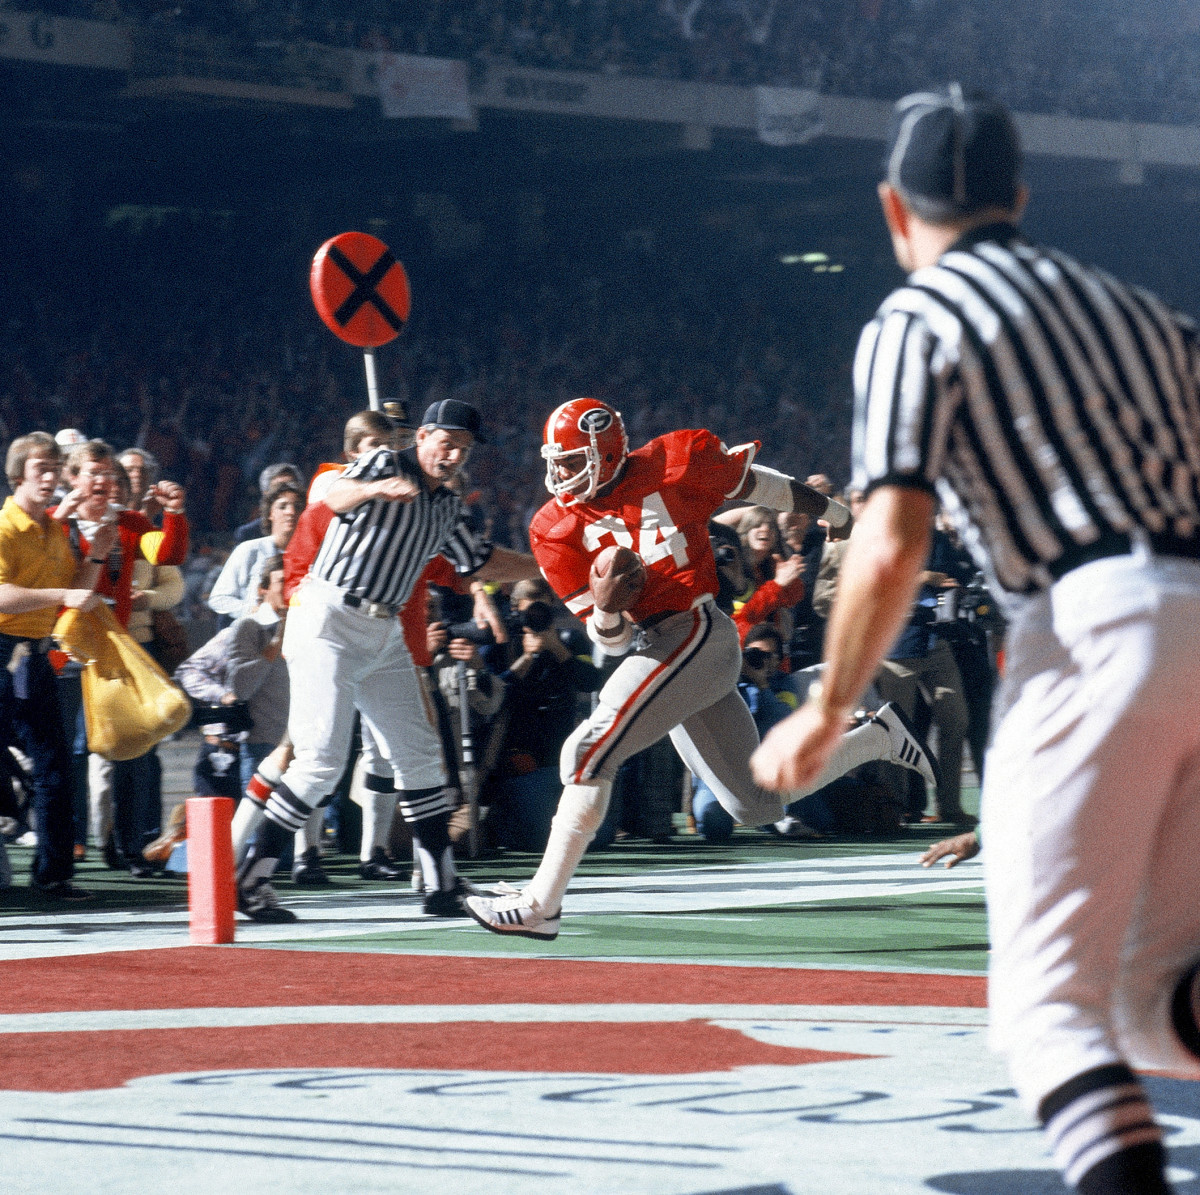 The state of Georgia was first introduced to Walker in 1980, when the freshman carried the Bulldogs to a national title-sealing Sugar Bowl win over Notre Dame. 